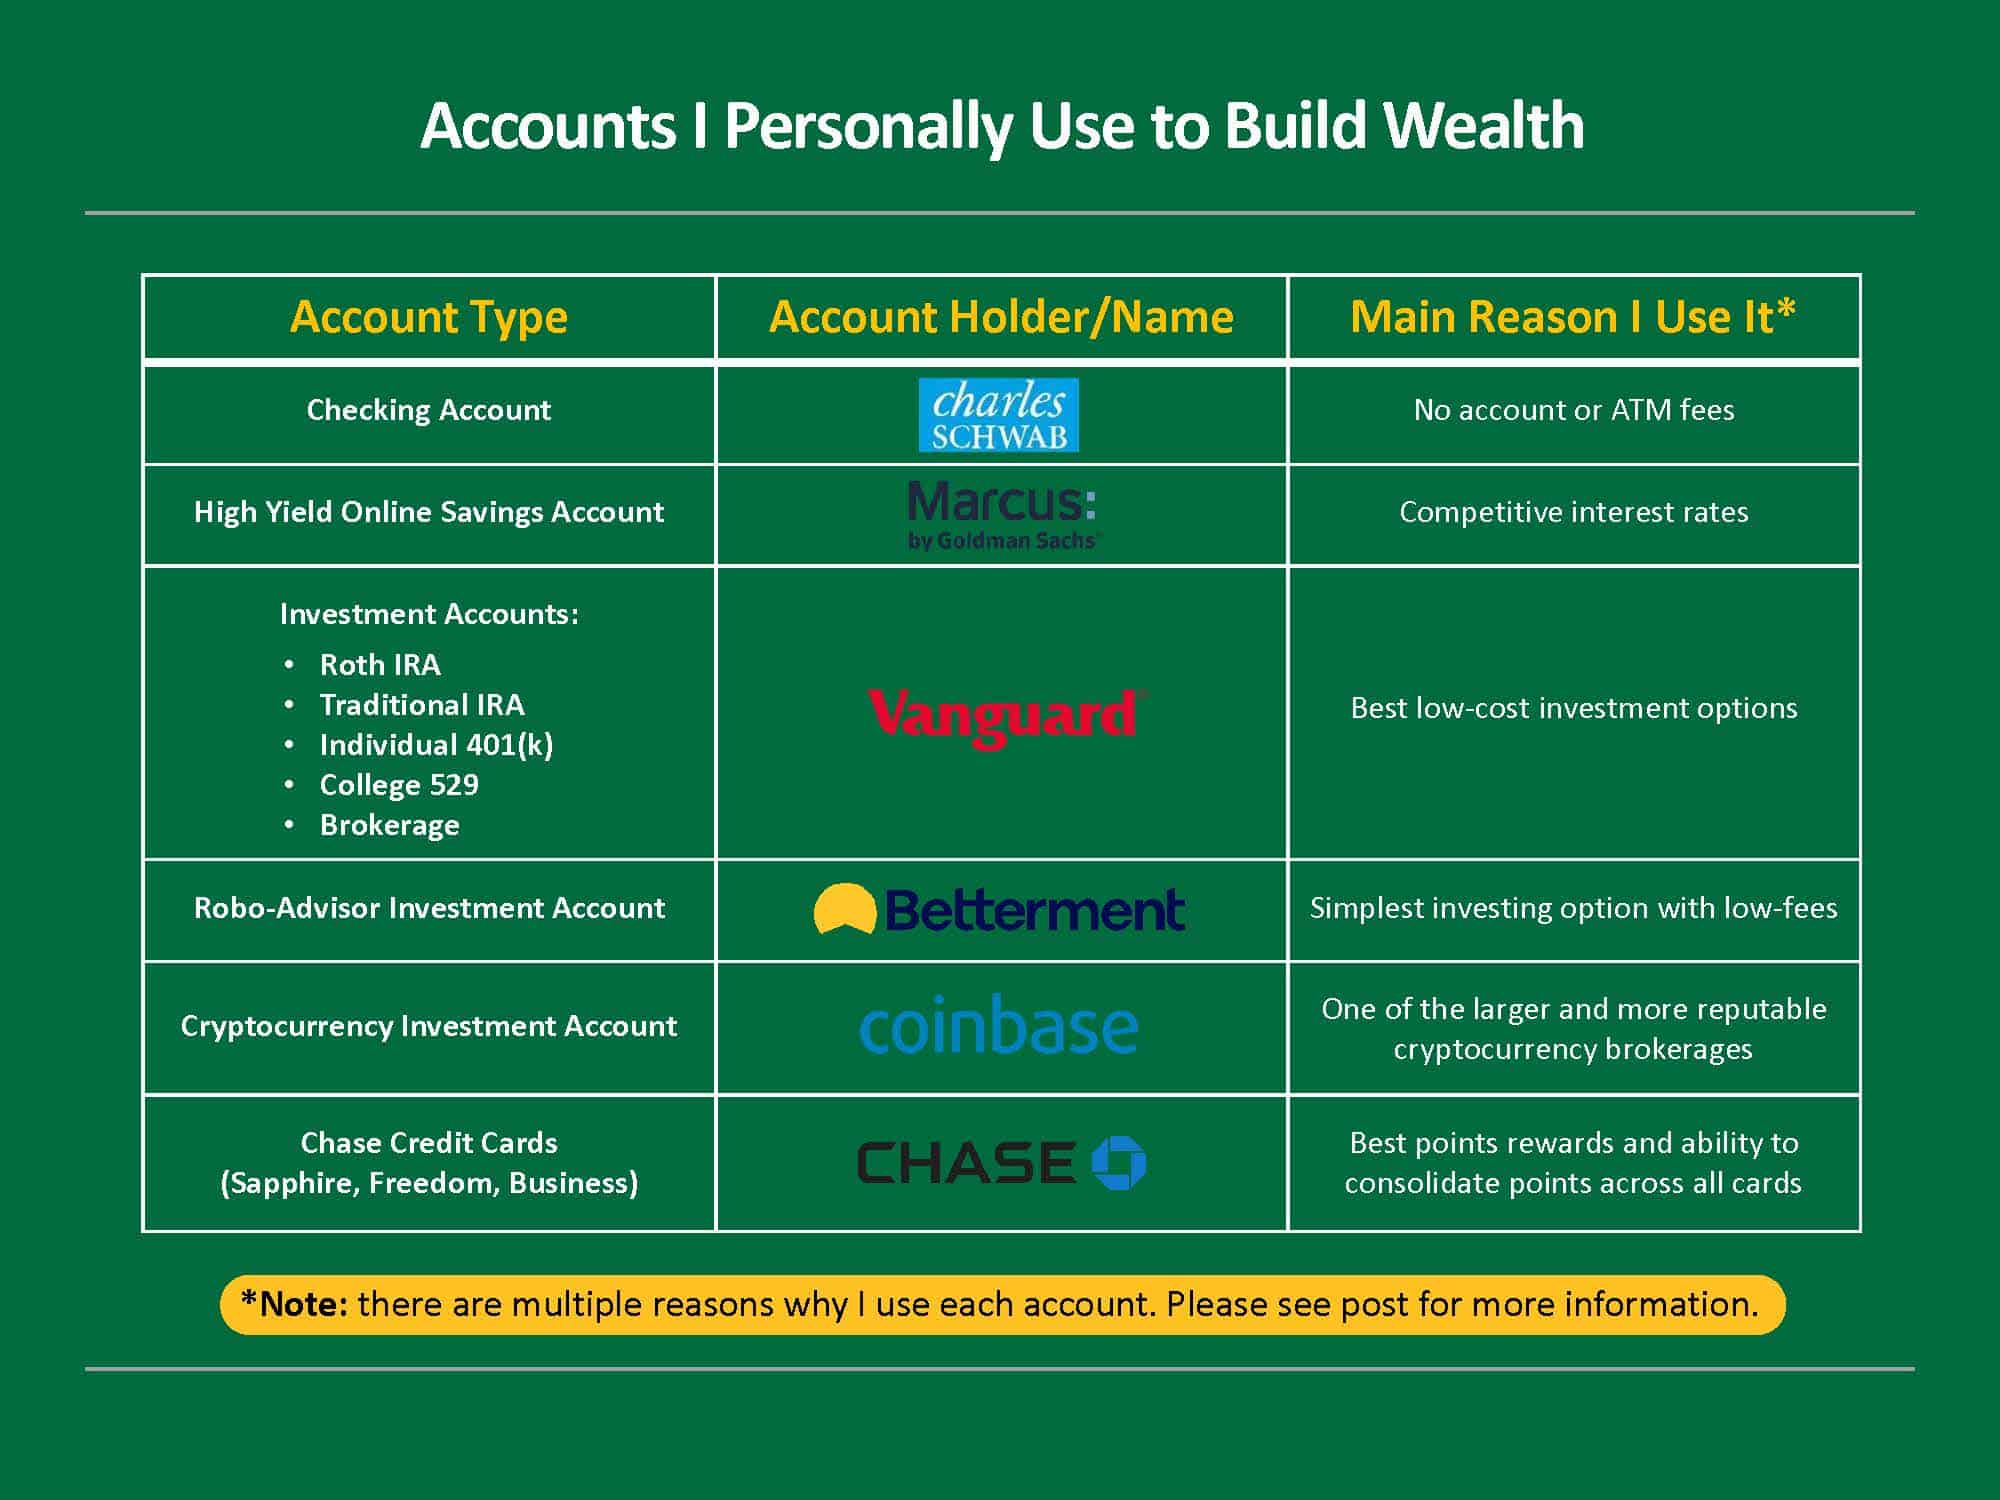 Accounts and Tools I Use To Build Wealth